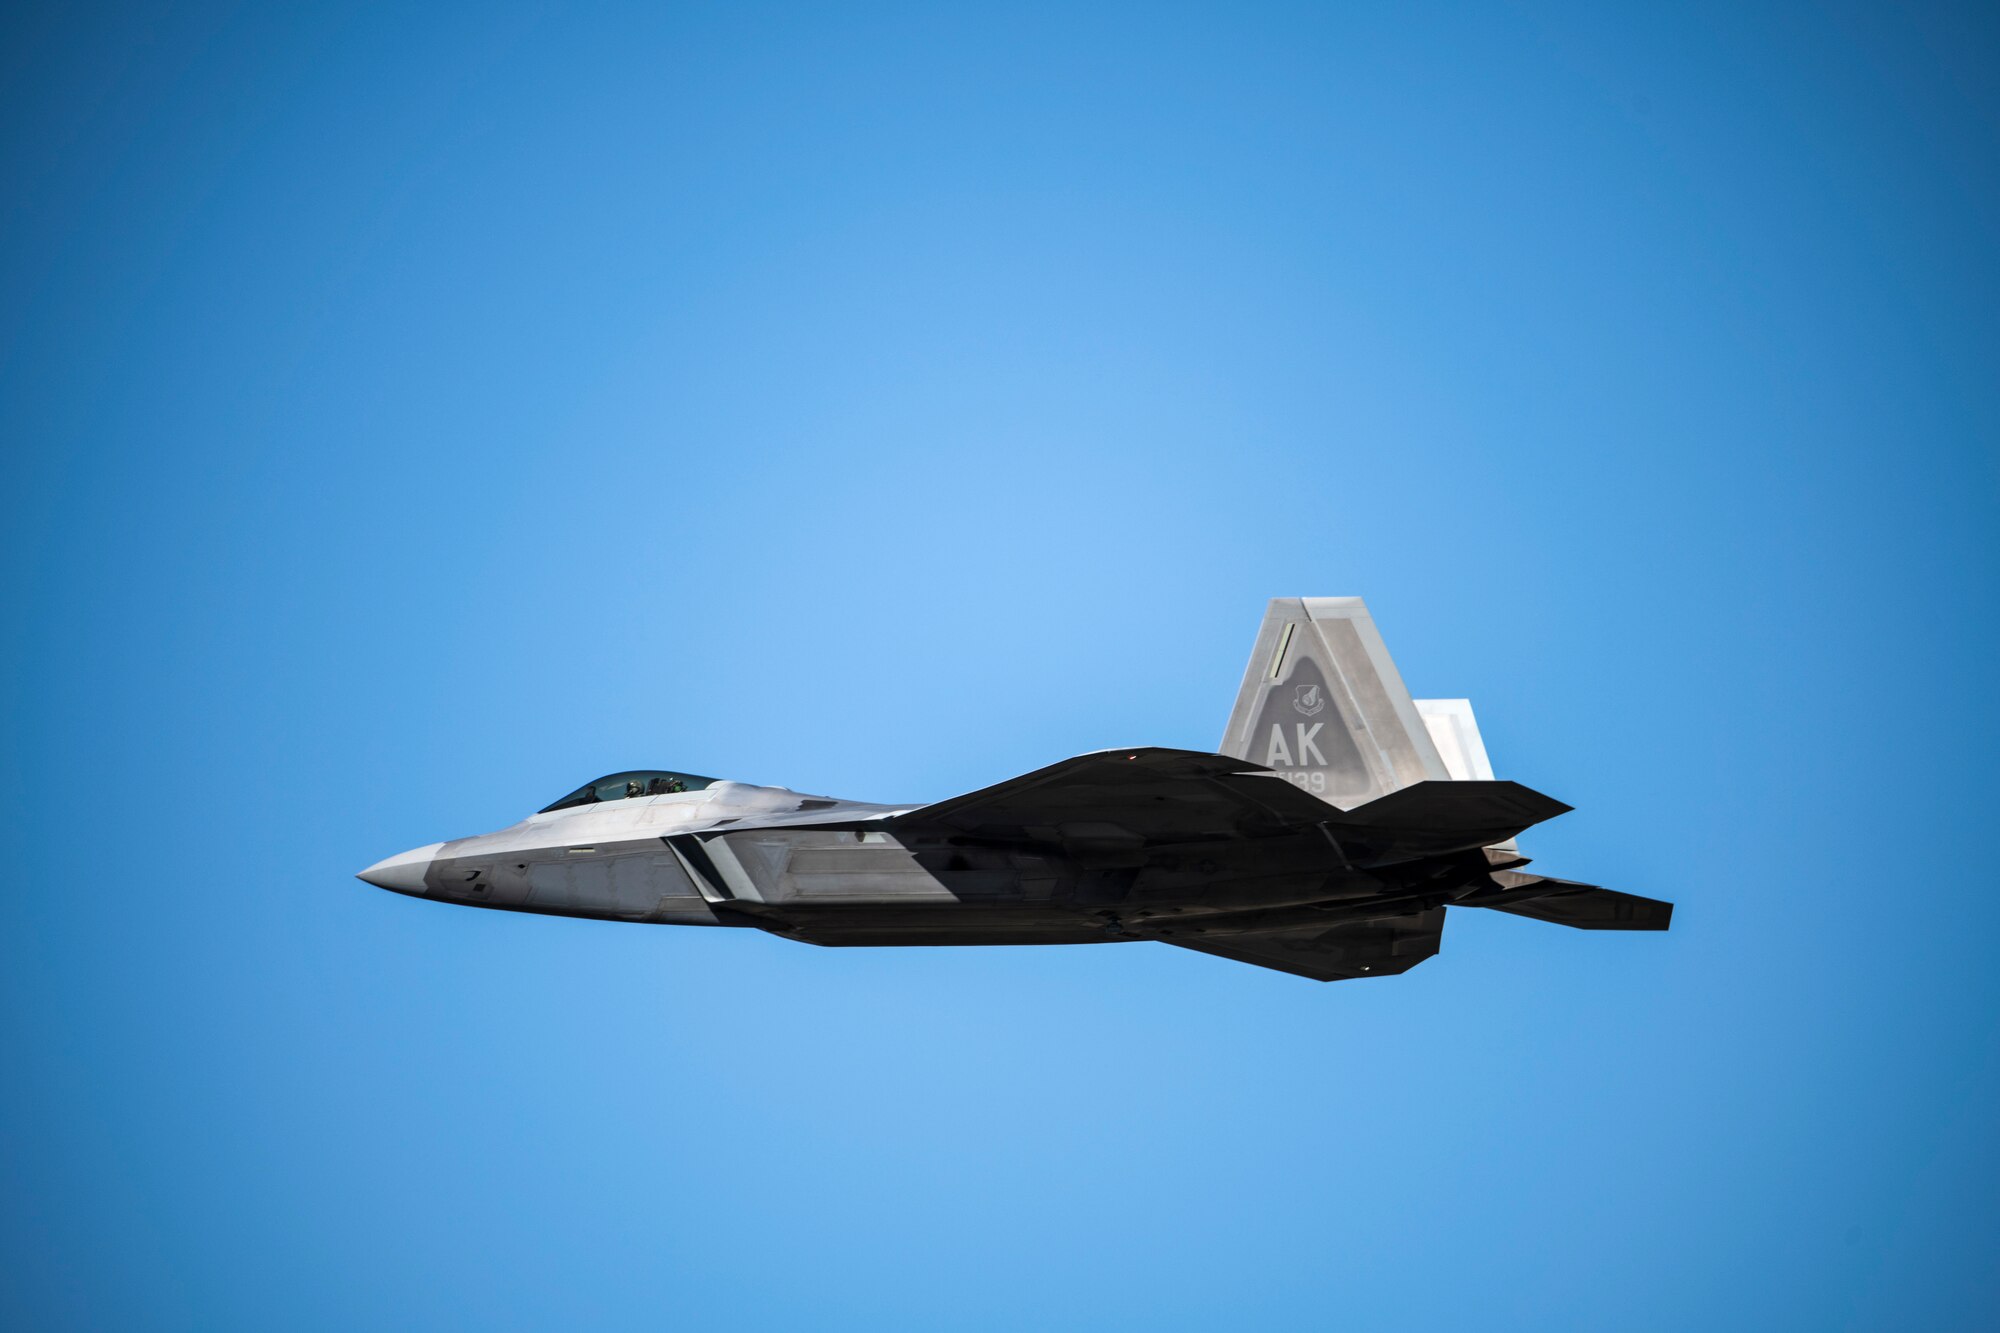 An F-22 Raptor assigned to the 90th Fighter Squadron from Joint Base Elmendorf-Richardson, Alaska, prepares to land at Tyndall Air Force Base, Florida, Oct. 30, 2020. The aircraft arrived to participate in a large-force exercise known as Checkered Flag. (U.S. Air Force photo by Airman 1st Class Tiffany Price)